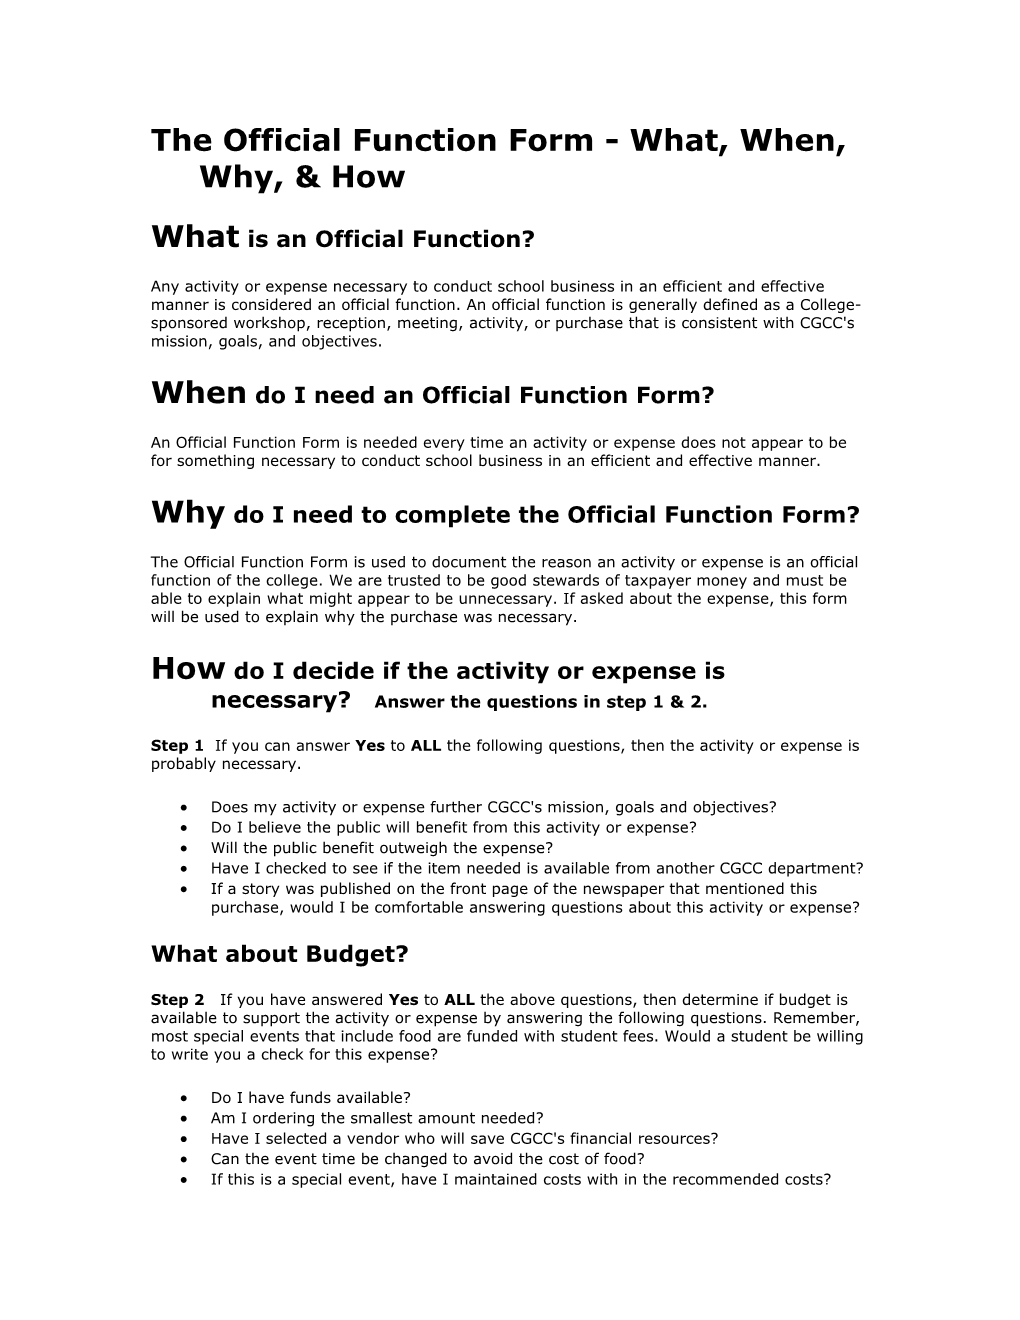 Official Function Form Steps